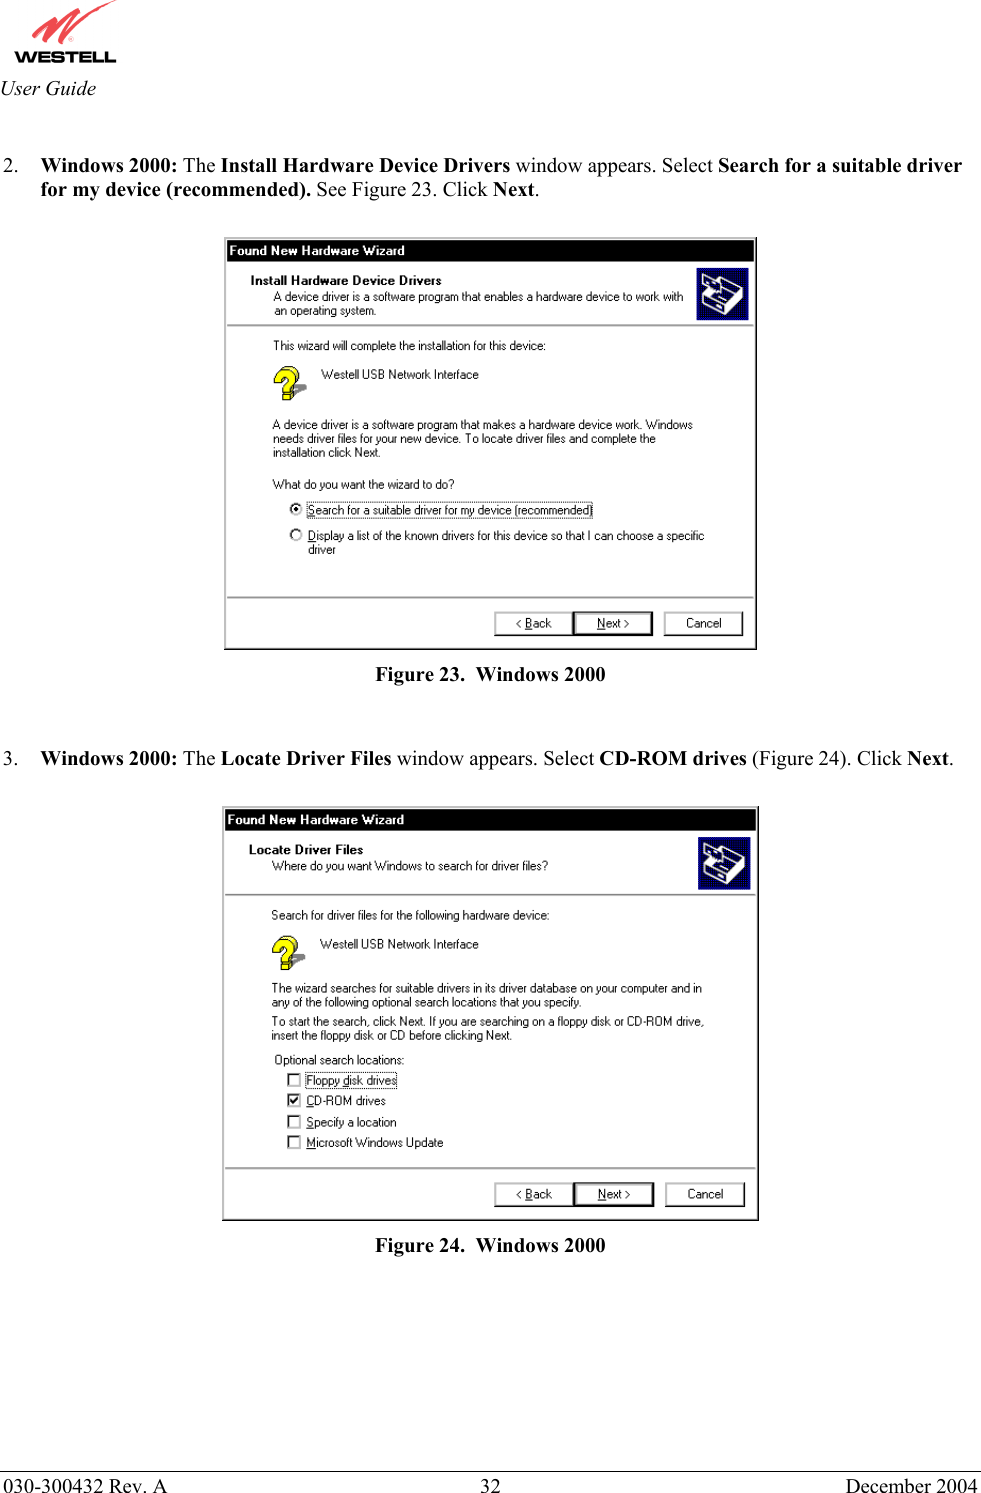       030-300432 Rev. A  32 December 2004  User Guide  2.  Windows 2000: The Install Hardware Device Drivers window appears. Select Search for a suitable driver for my device (recommended). See Figure 23. Click Next.   Figure 23.  Windows 2000   3.  Windows 2000: The Locate Driver Files window appears. Select CD-ROM drives (Figure 24). Click Next.   Figure 24.  Windows 2000         